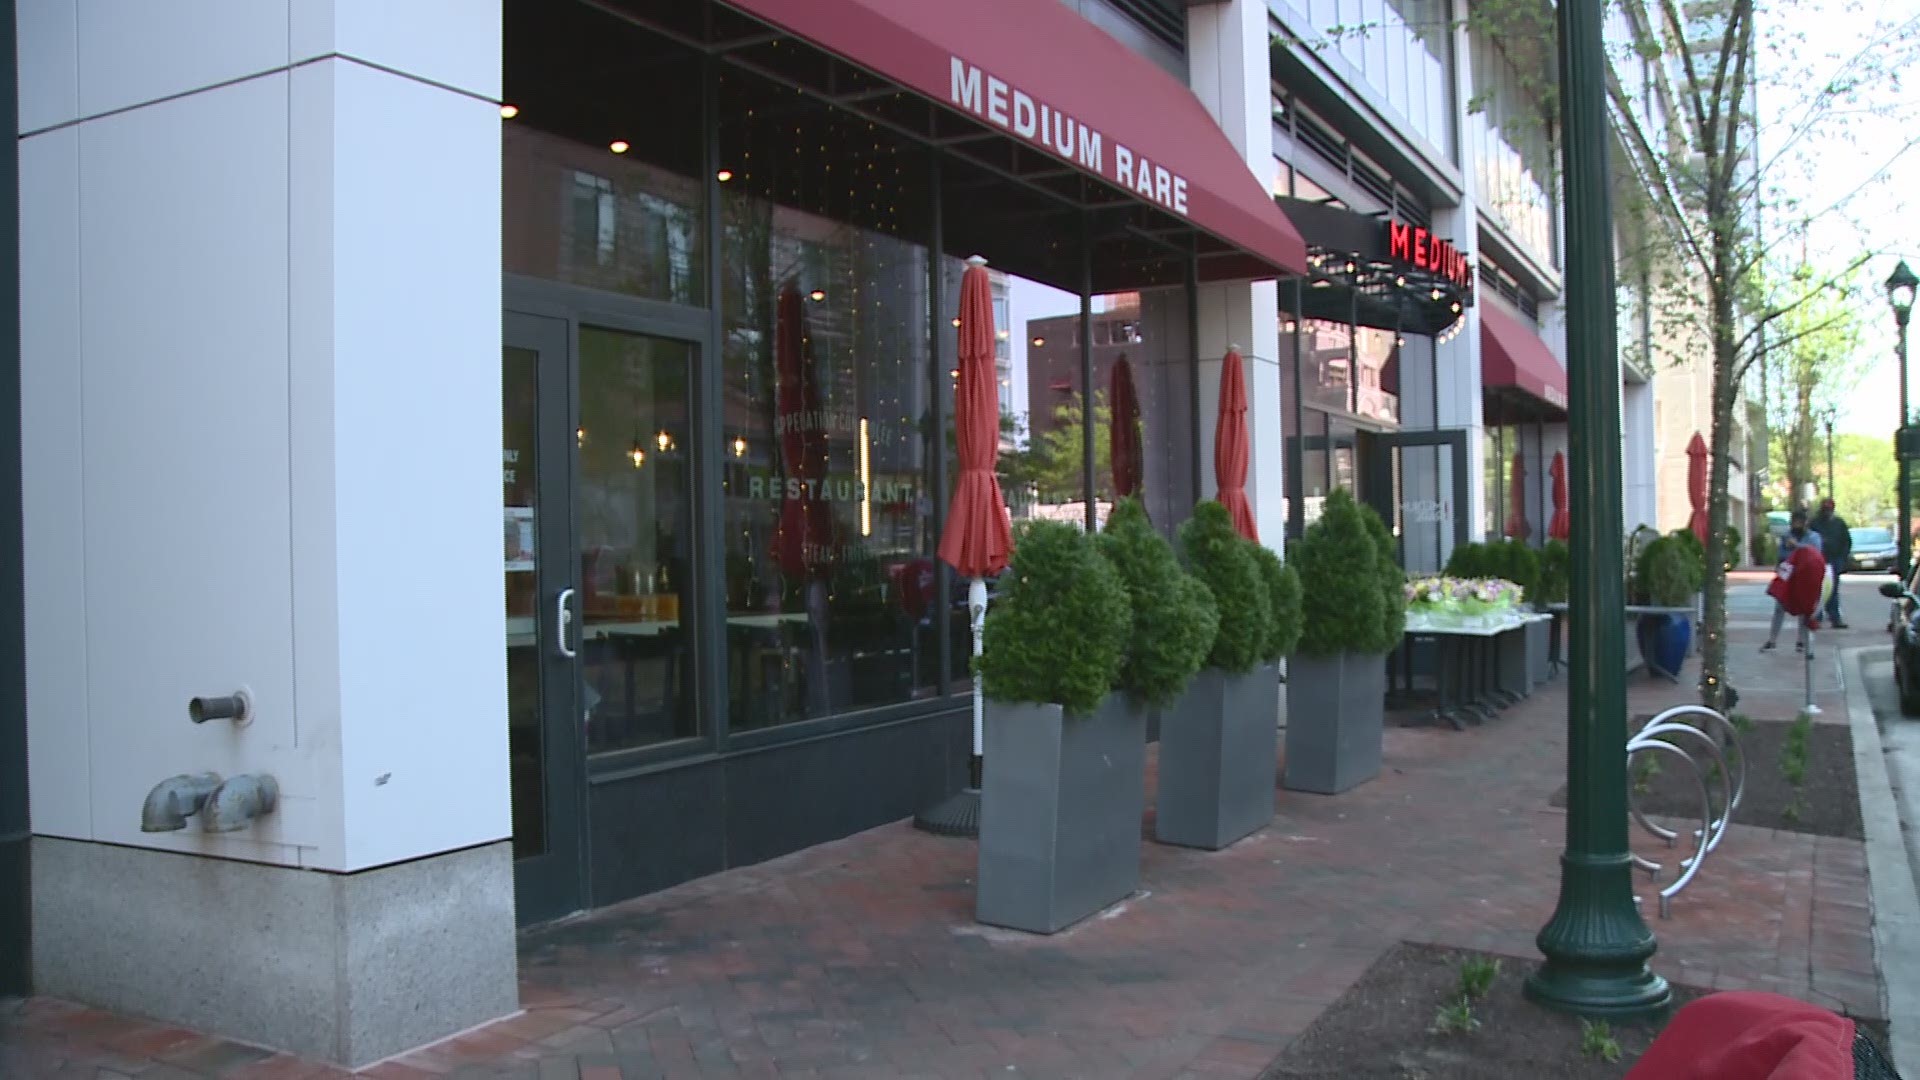 Medium Rare is delivering free food to mothers who are 70 years or older in the DMV.